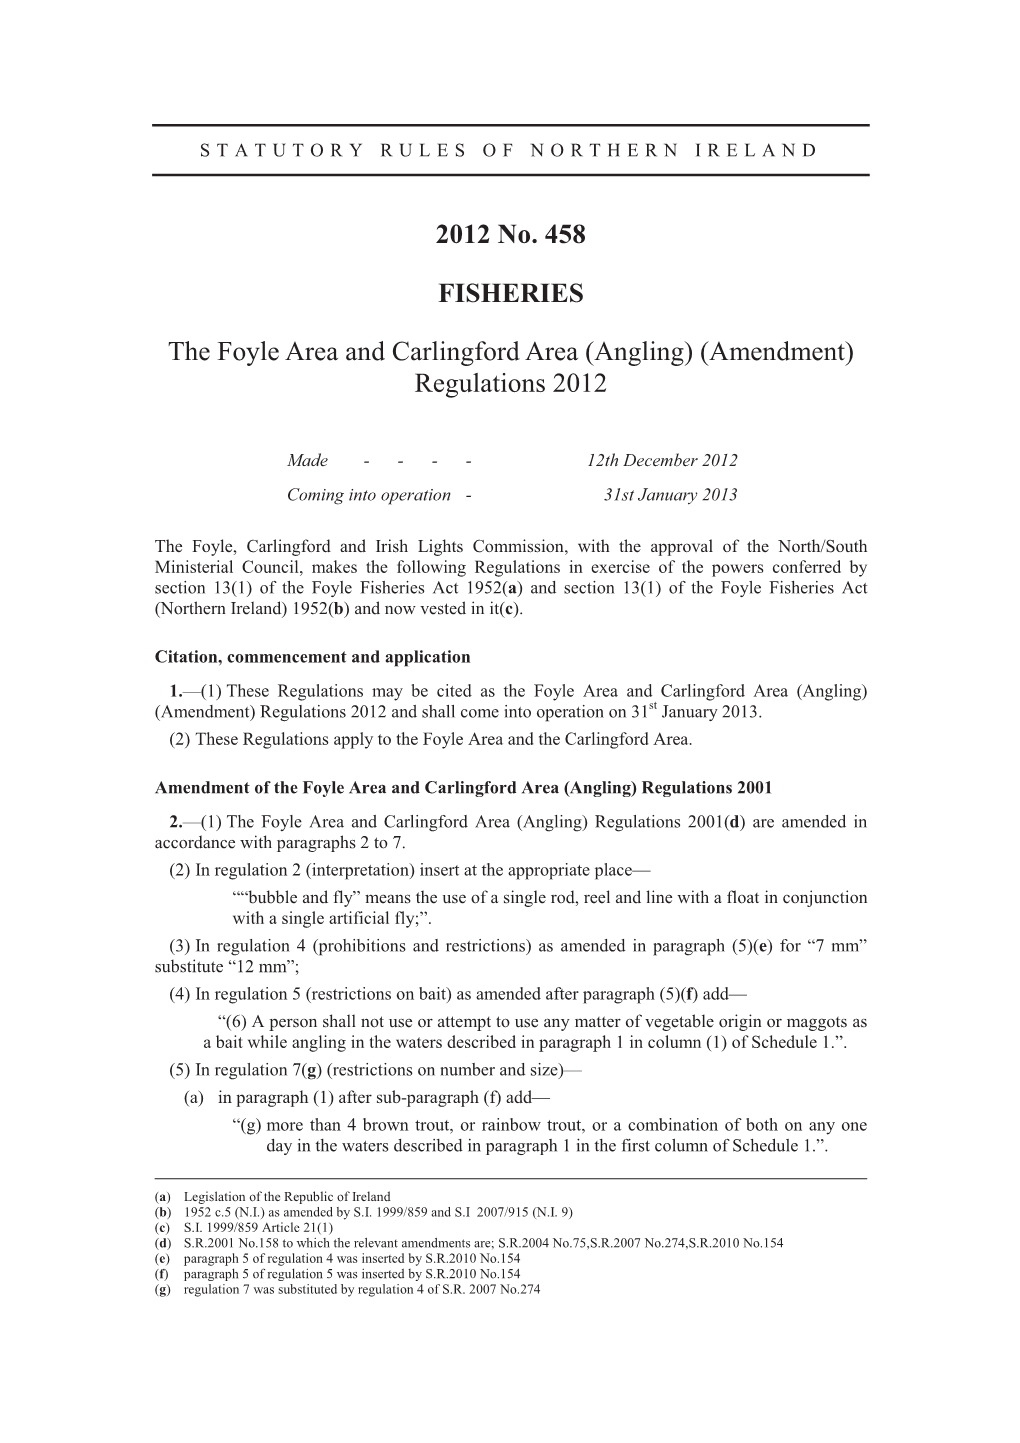 2012 No. 458 FISHERIES the Foyle Area and Carlingford Area (Angling) (Amendment) Regulations 2012